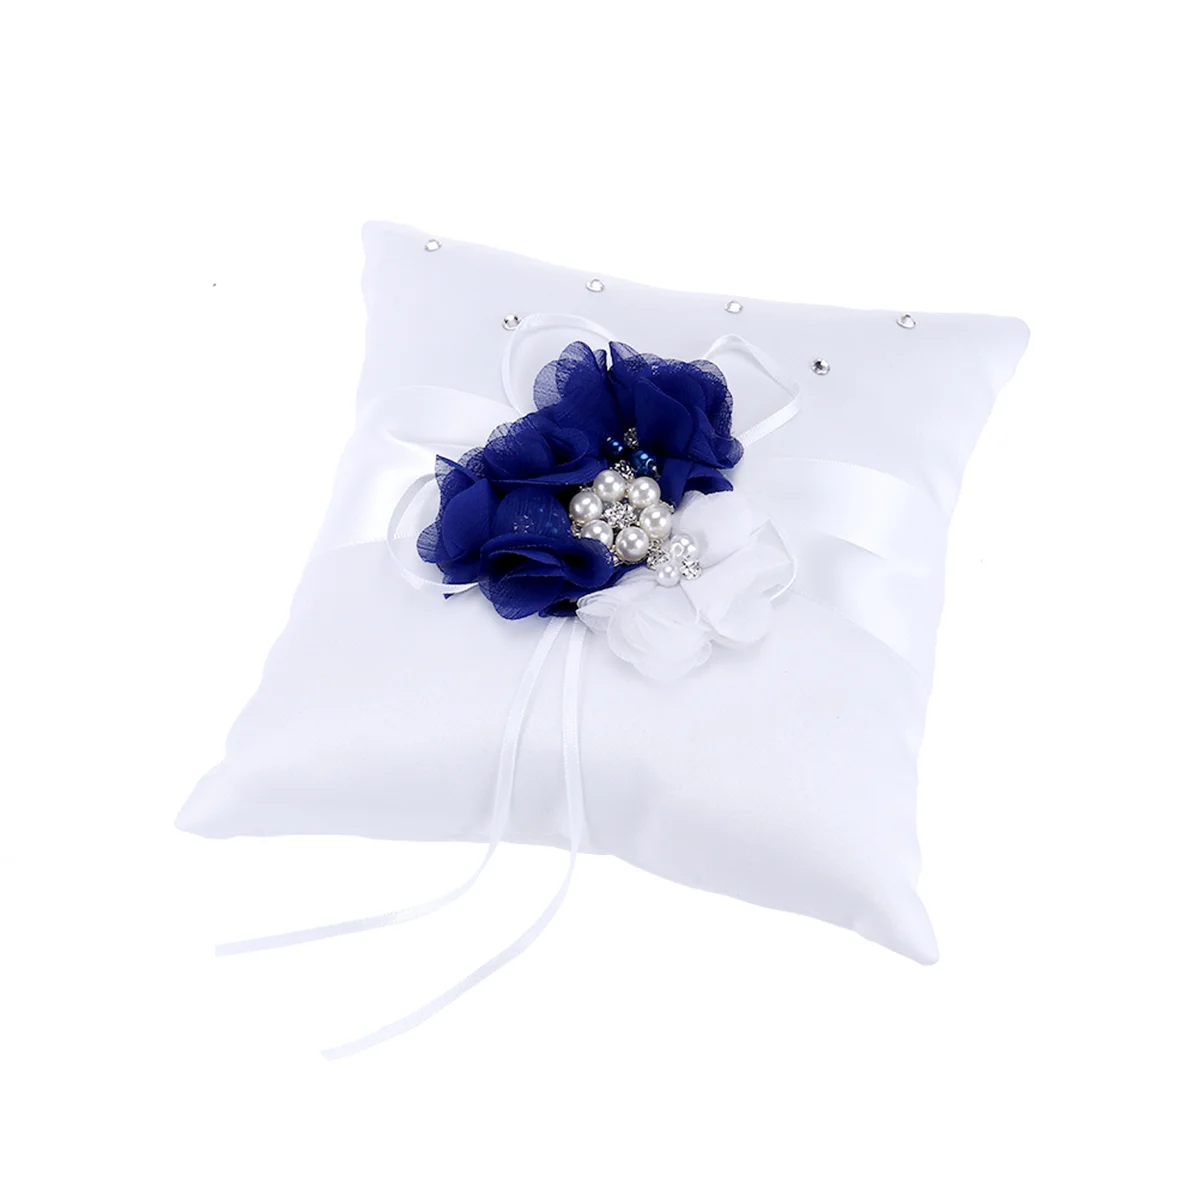 

20*20cm Embellished Wedding Ring Pillow Cushion Pearl Flower Decorated Ring Bearer Pillow (Blue & White Flower)